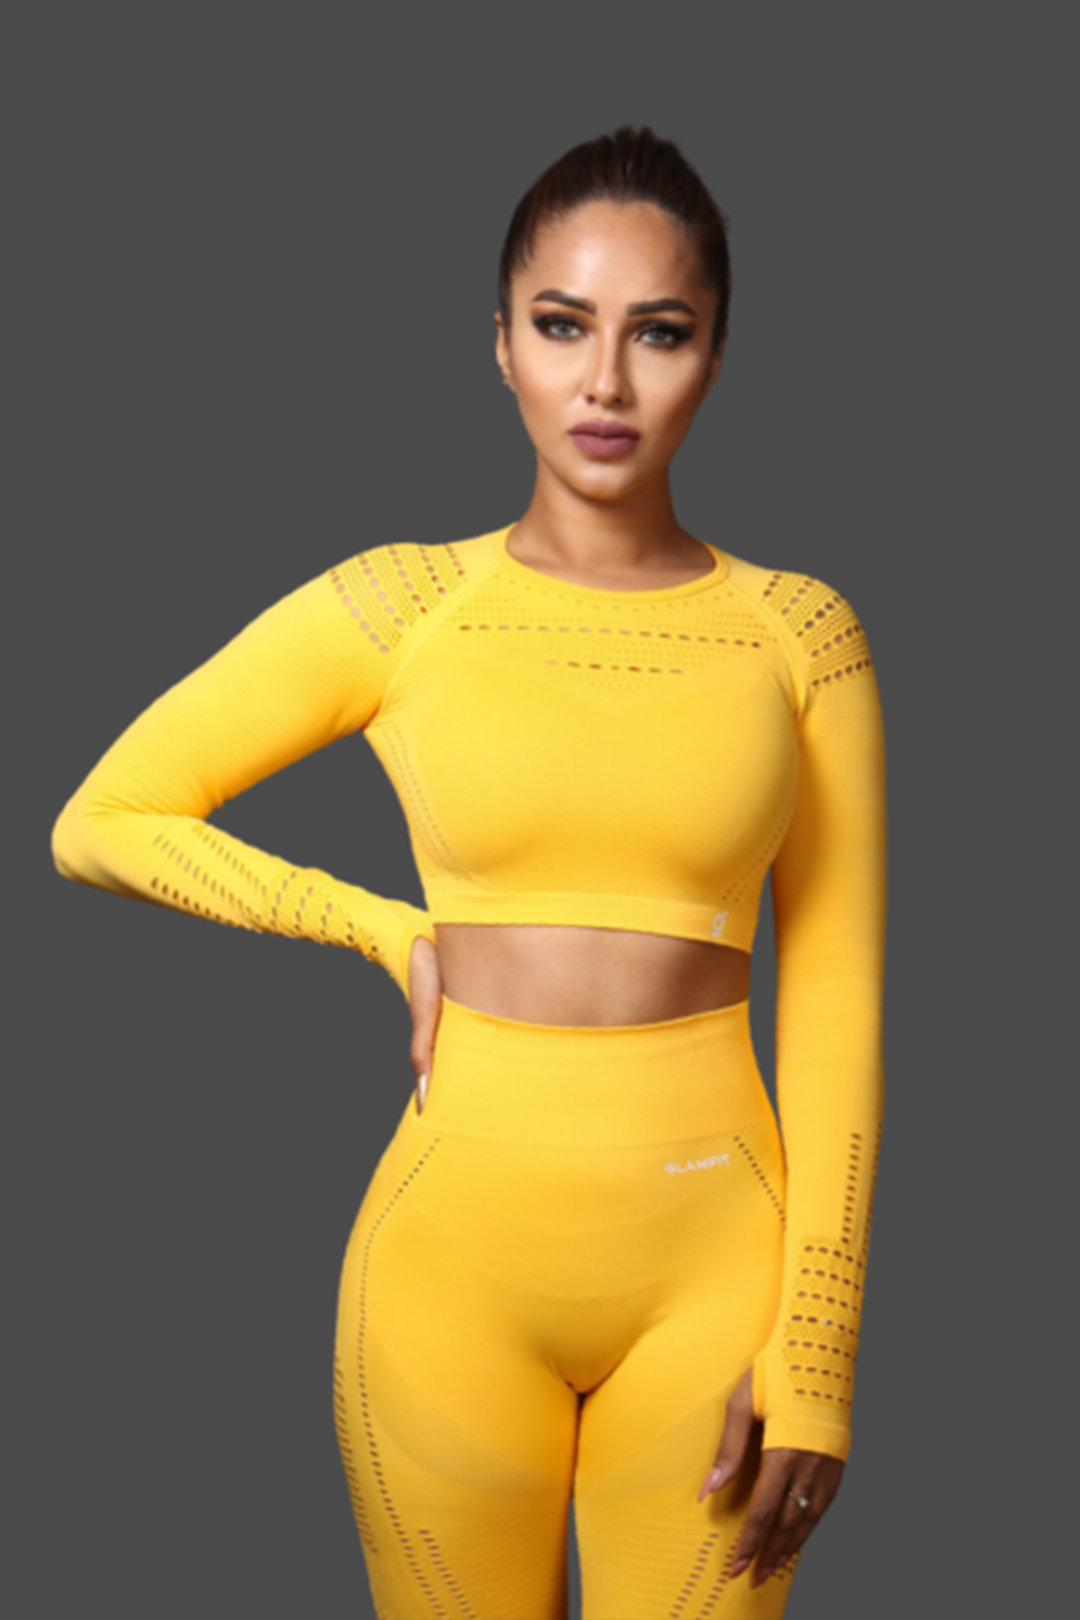 Women's Seamless Workout Outfits for women in Yellow - Buy Now!